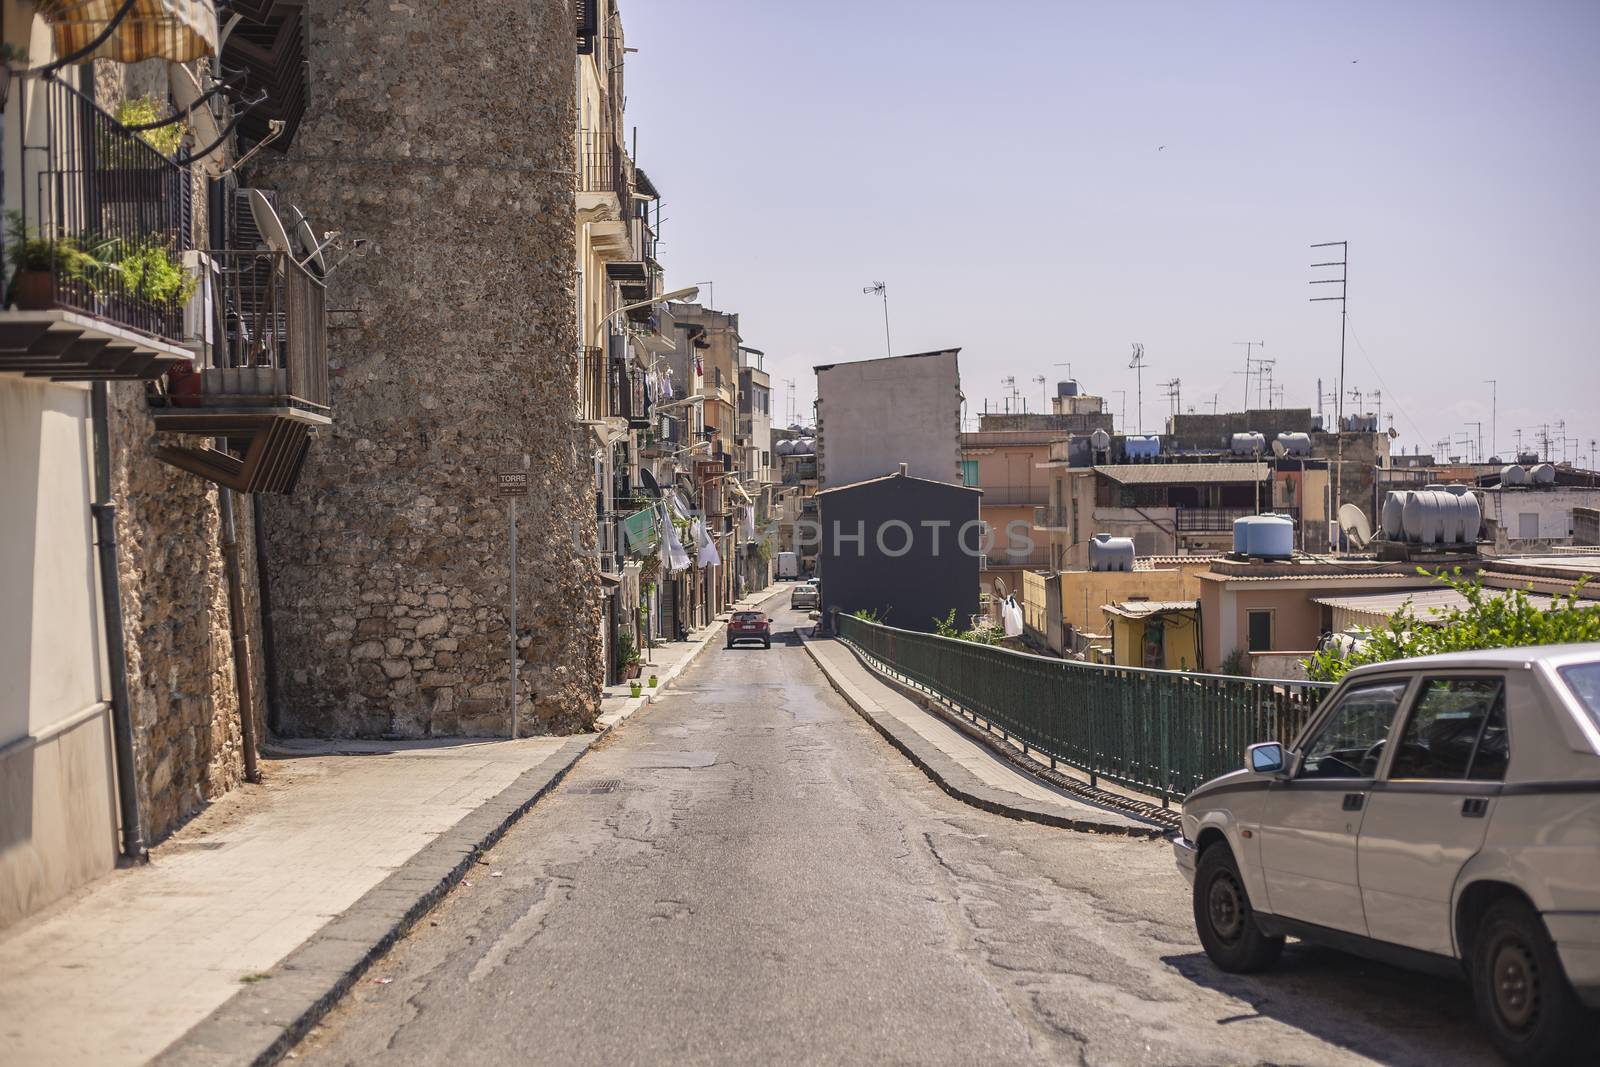 View of a street in the village of Gela with its daytime life in the south of Sicily in Italy.